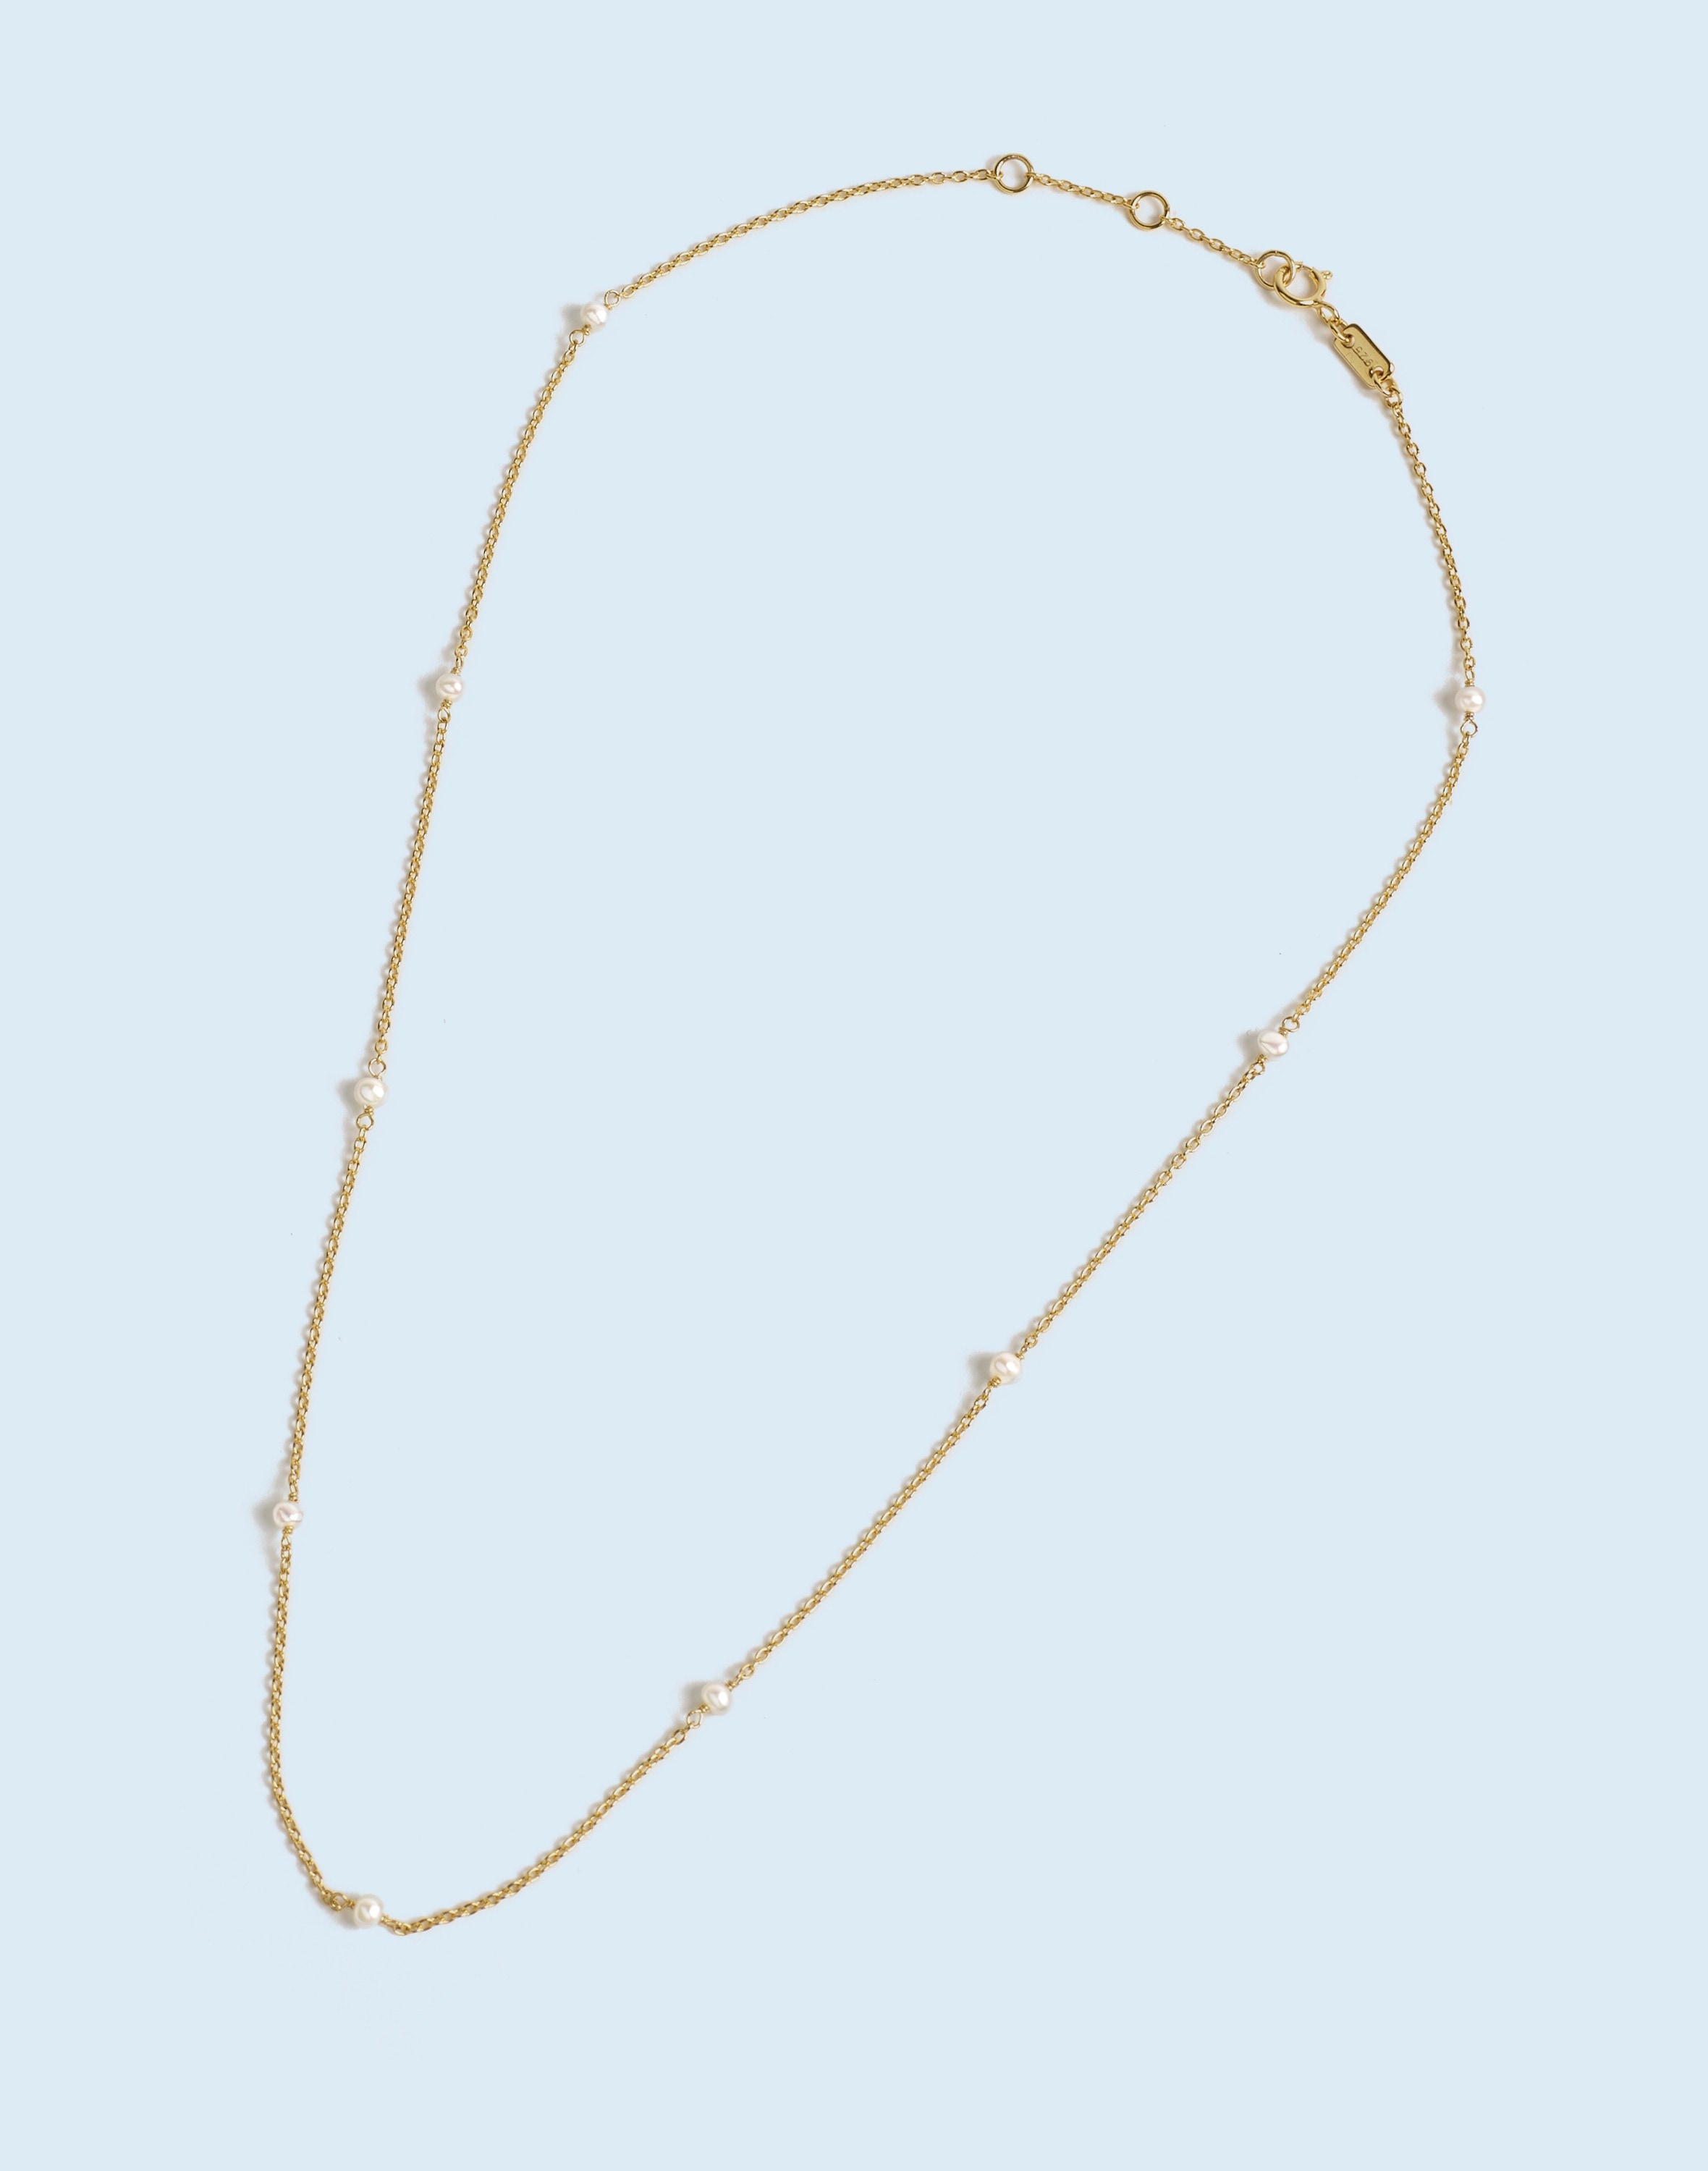 Demi-Fine Freshwater Pearl Station Necklace